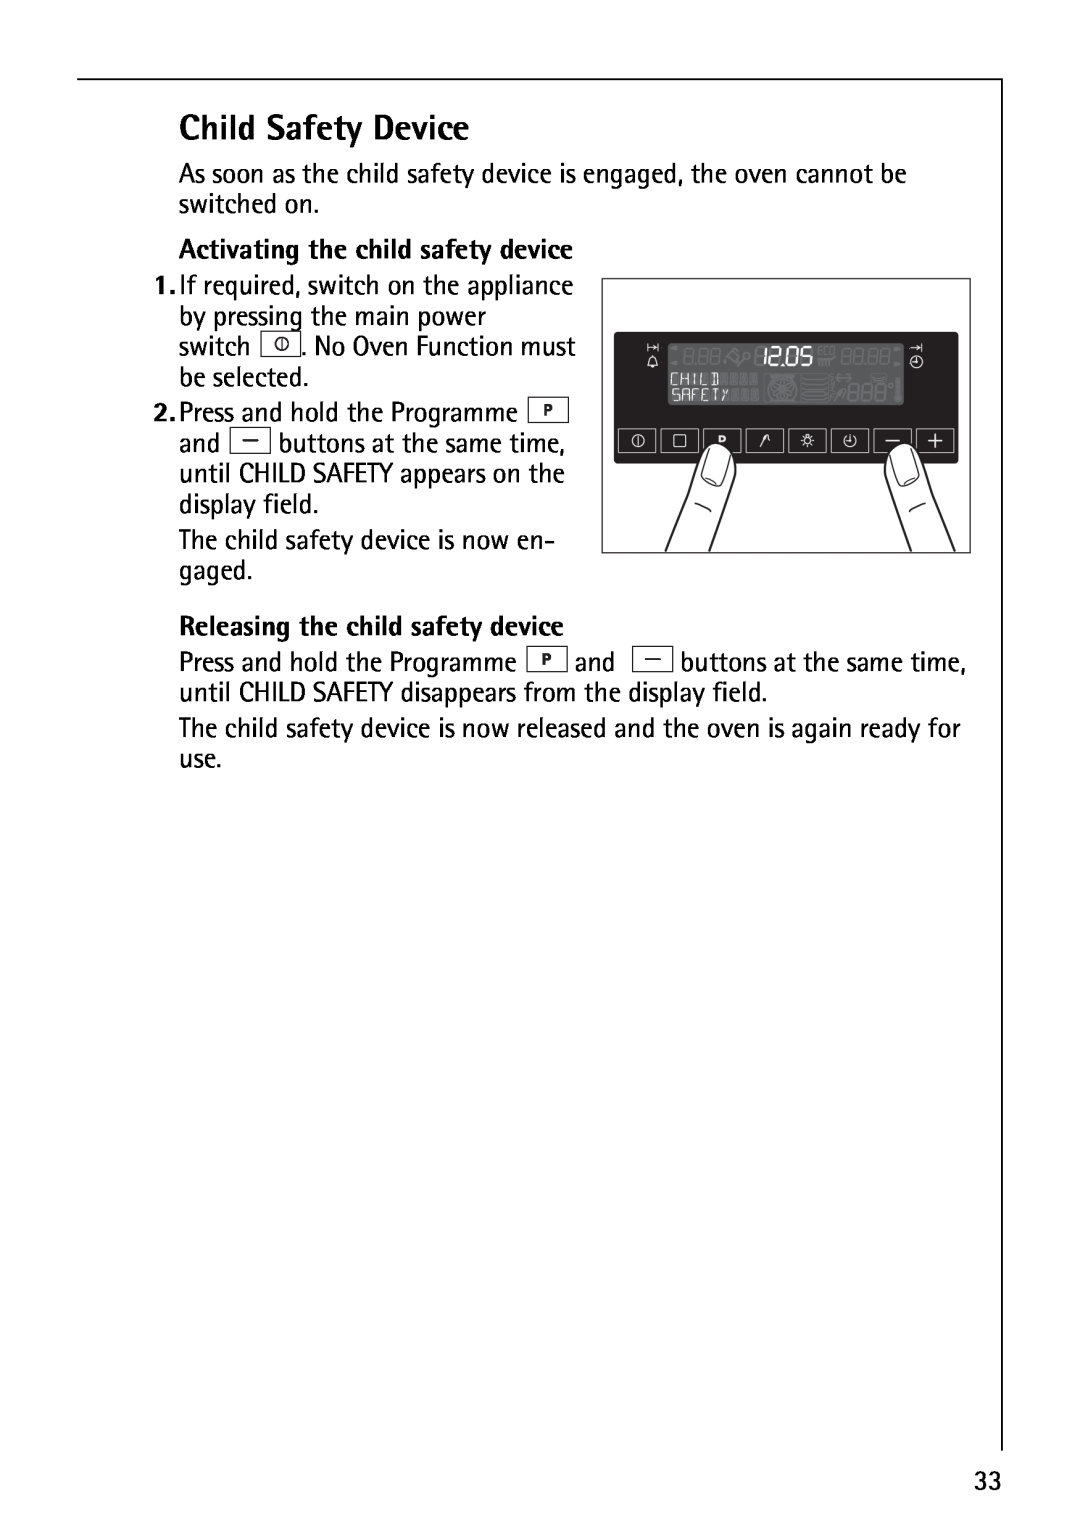 AEG B8920-1 manual Child Safety Device, Activating the child safety device, Releasing the child safety device 